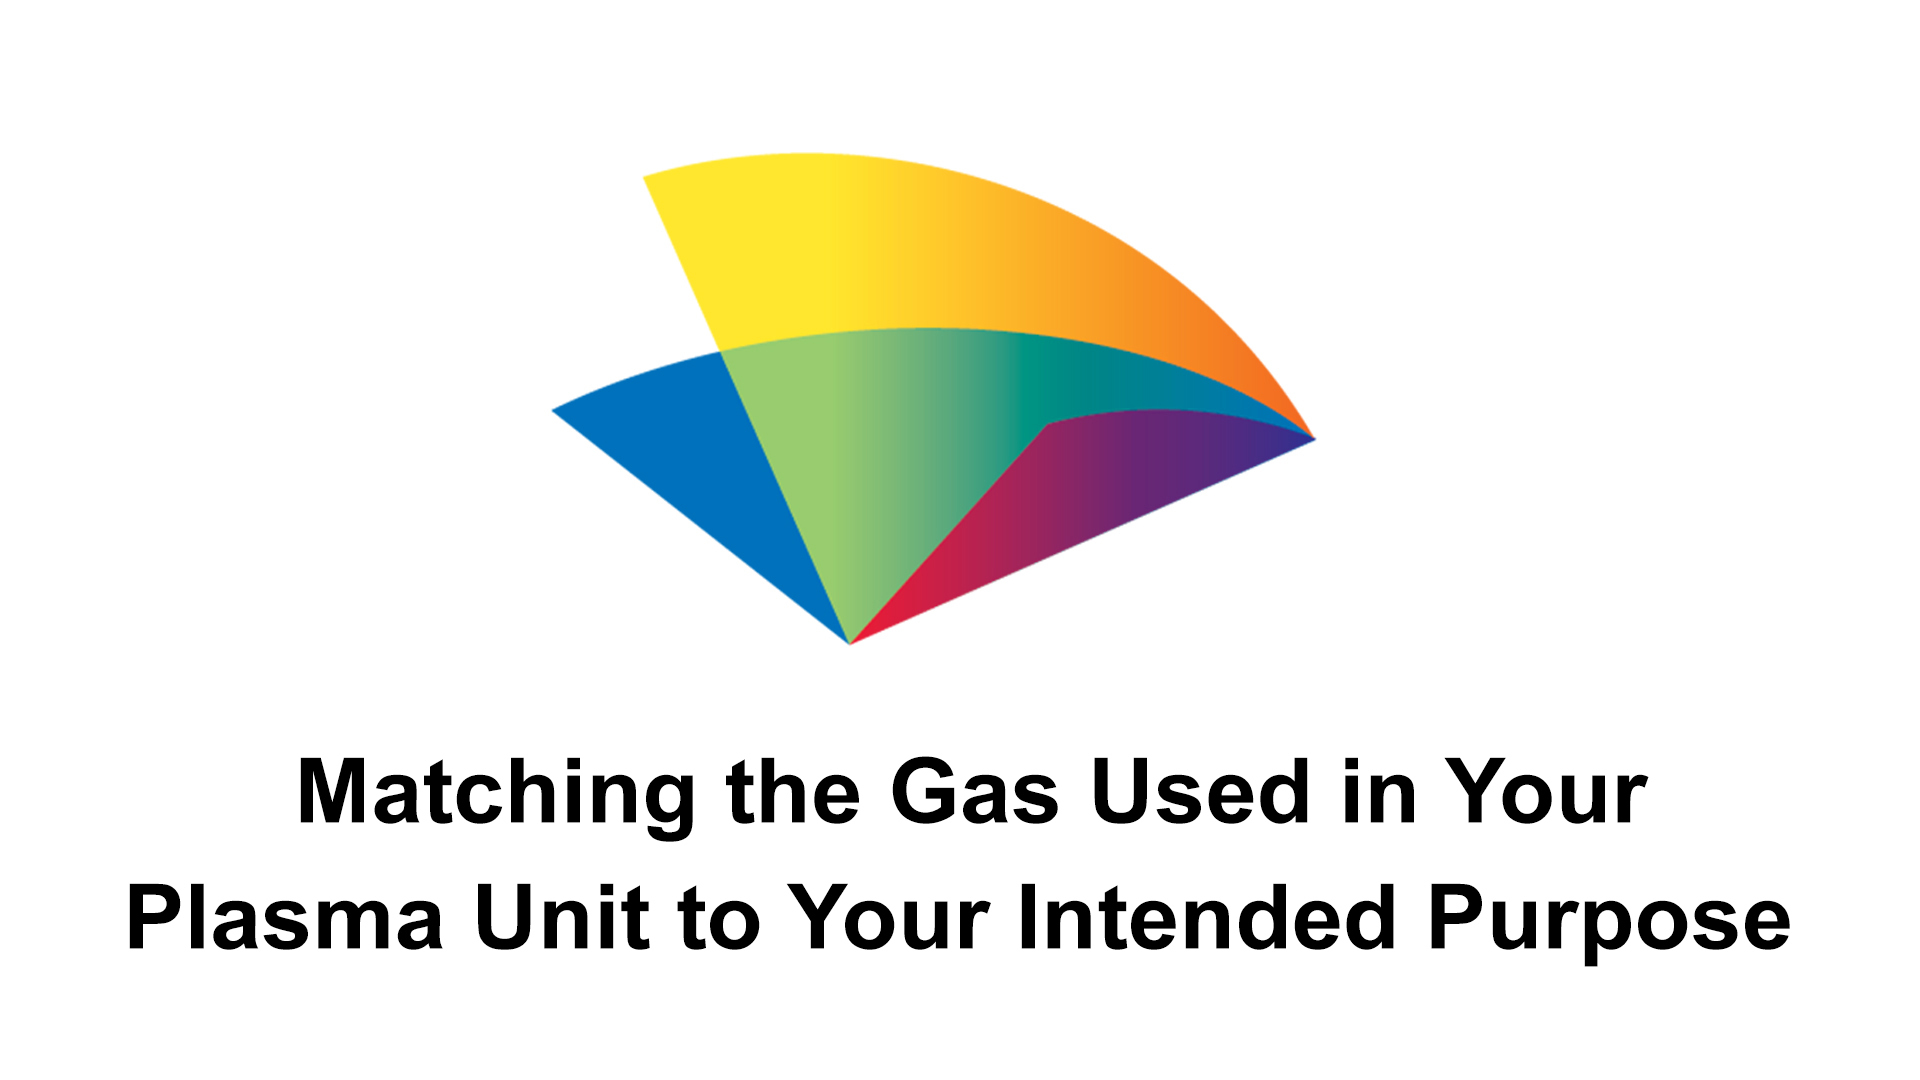 5-matching-the-gas-used-in-your-plasma-unit-to-your-intended purpose